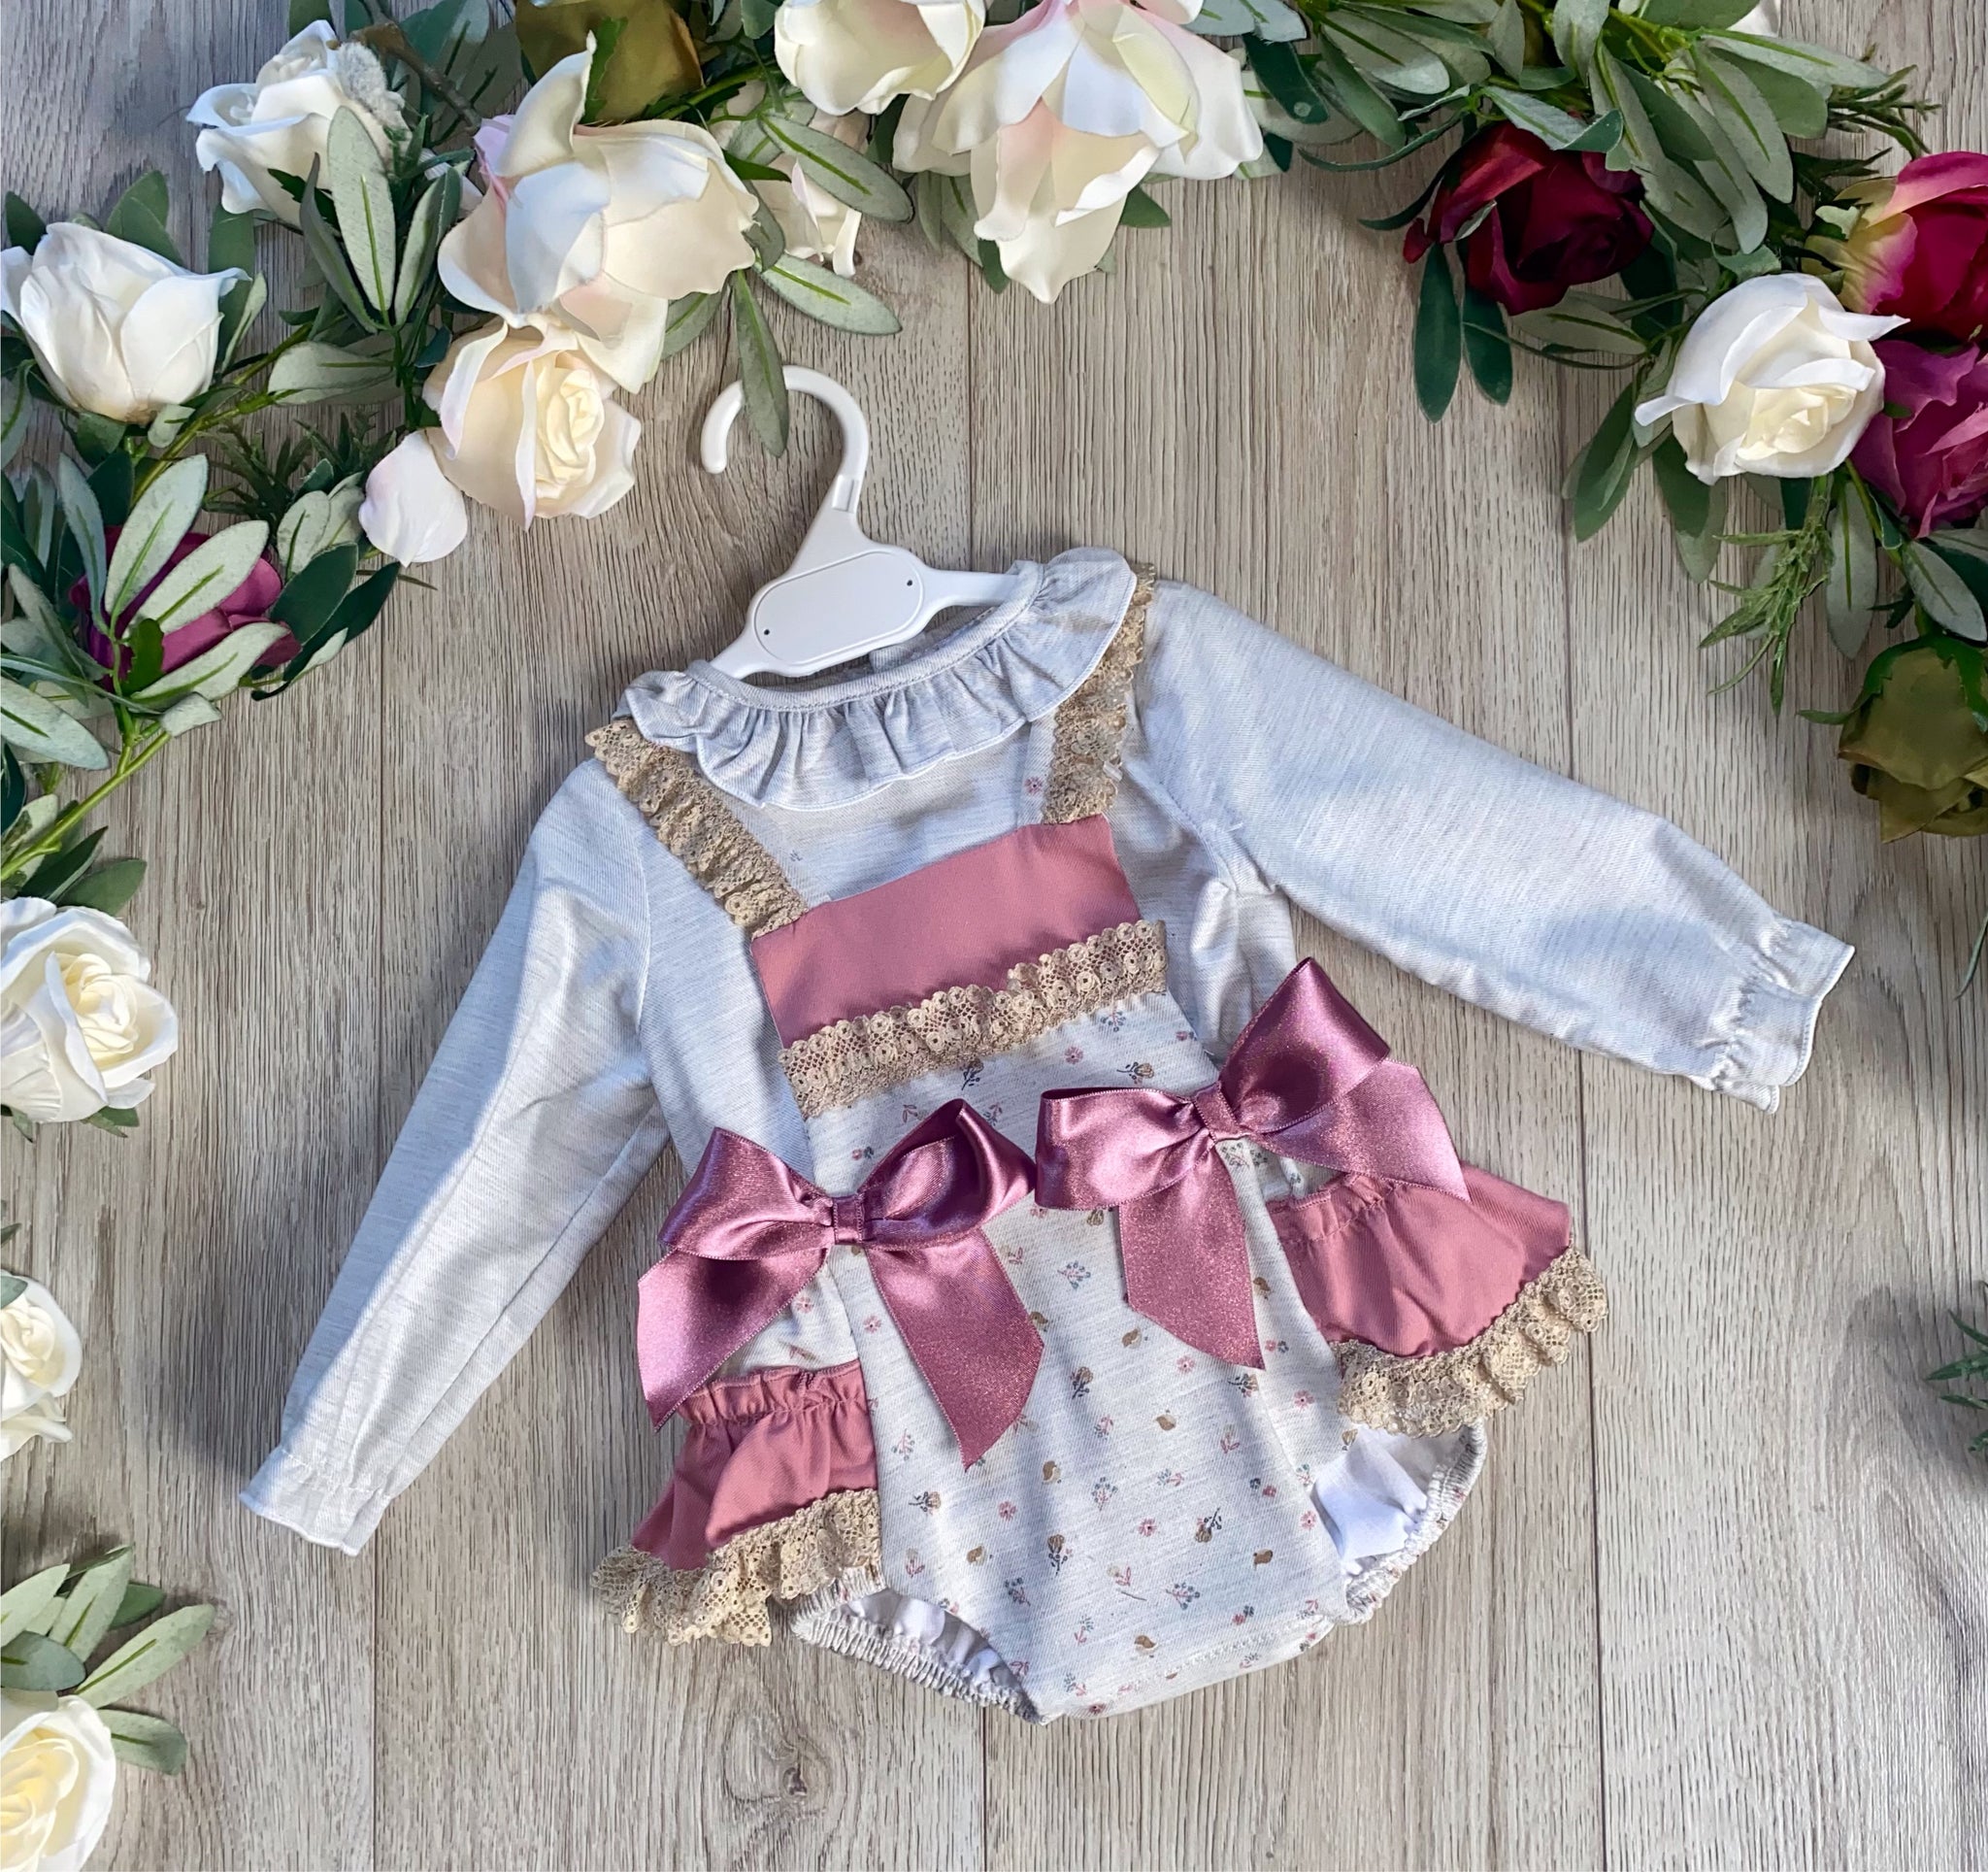 baby girls spanish grey romper plum frilly bow blouse set outfit 